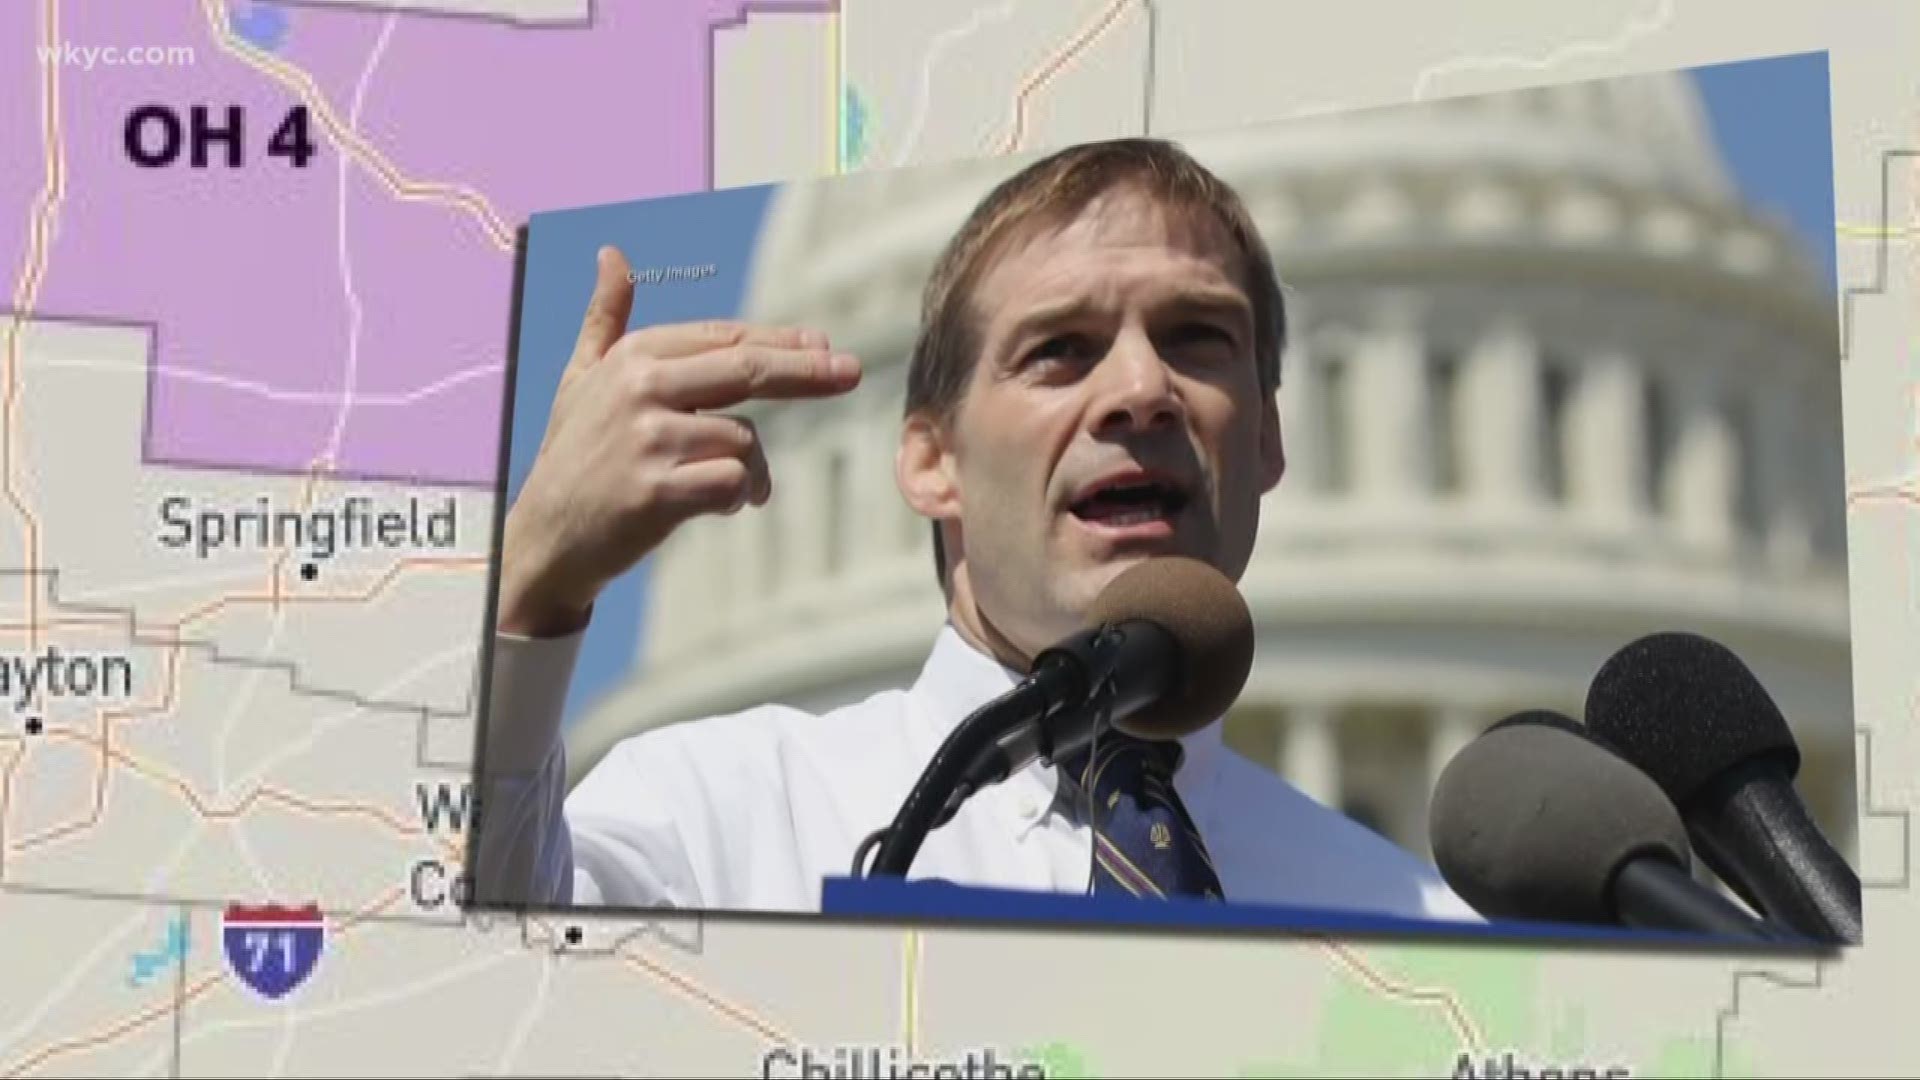 Rep. Jim Jordan accused of ignoring allegations of sexual abuse while a coach at Ohio State